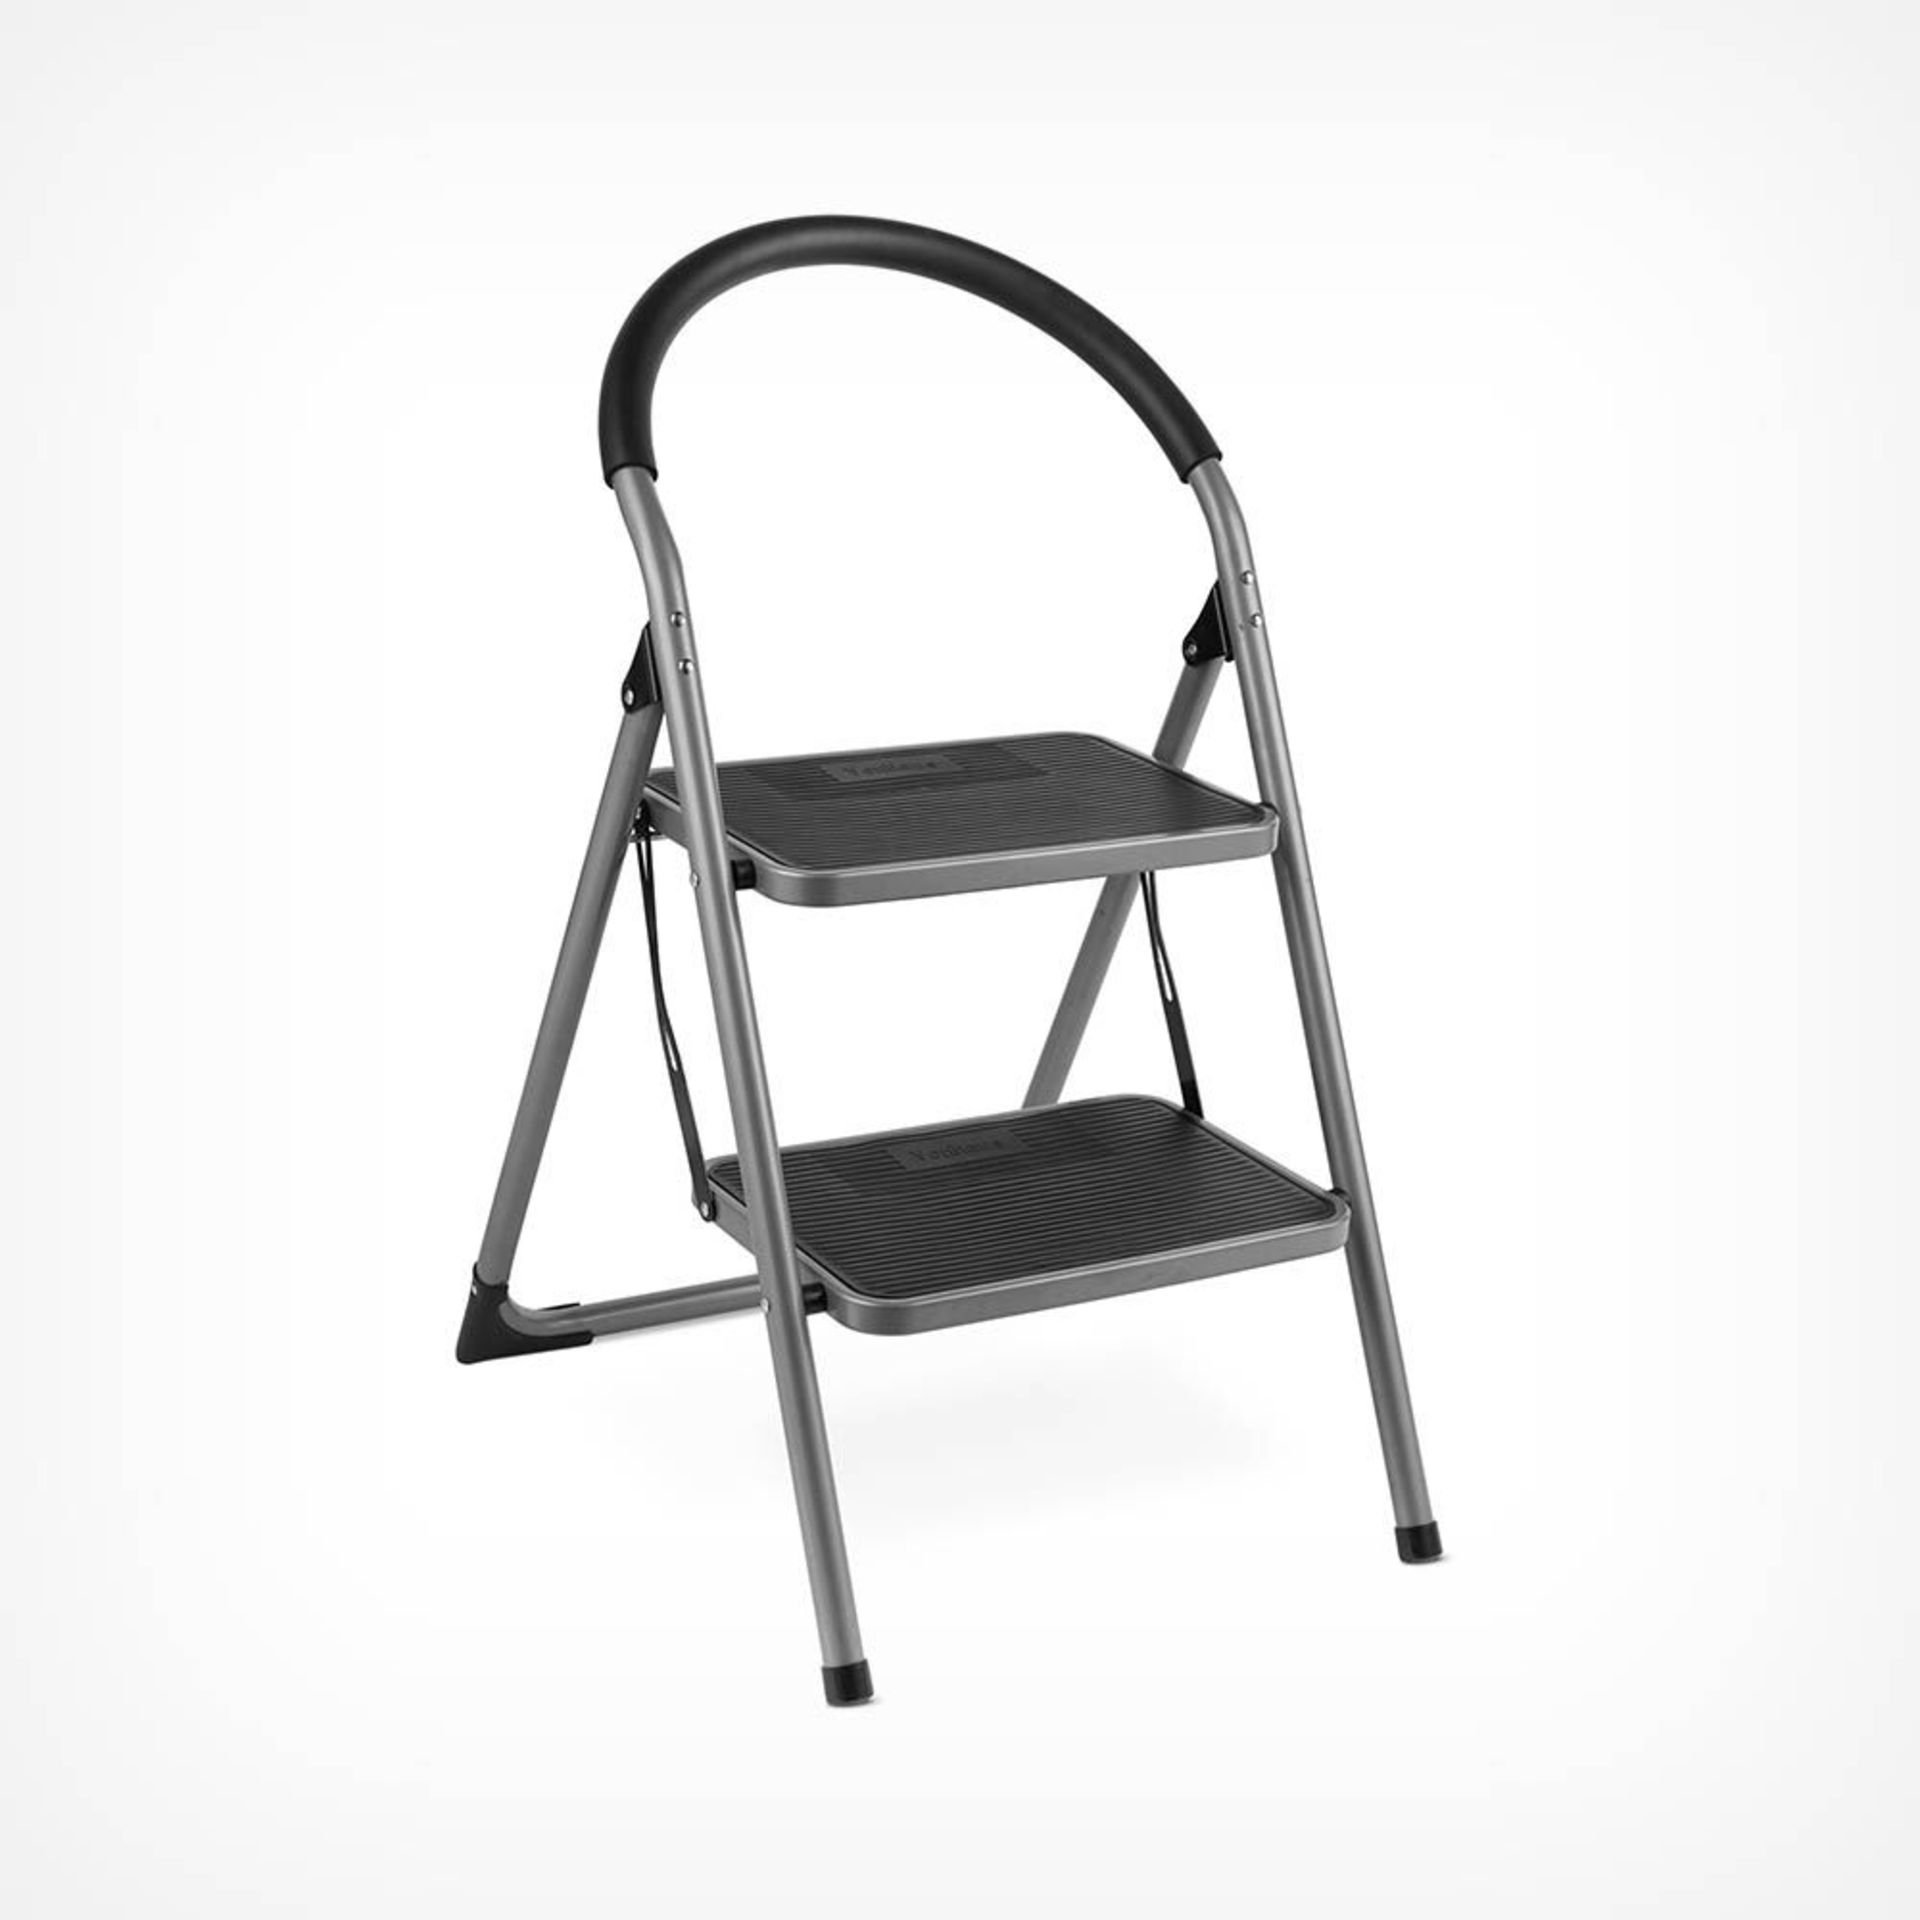 Premium 2 Step Ladder. - S2BW. Combining usability with durability, this step ladder is a perfect